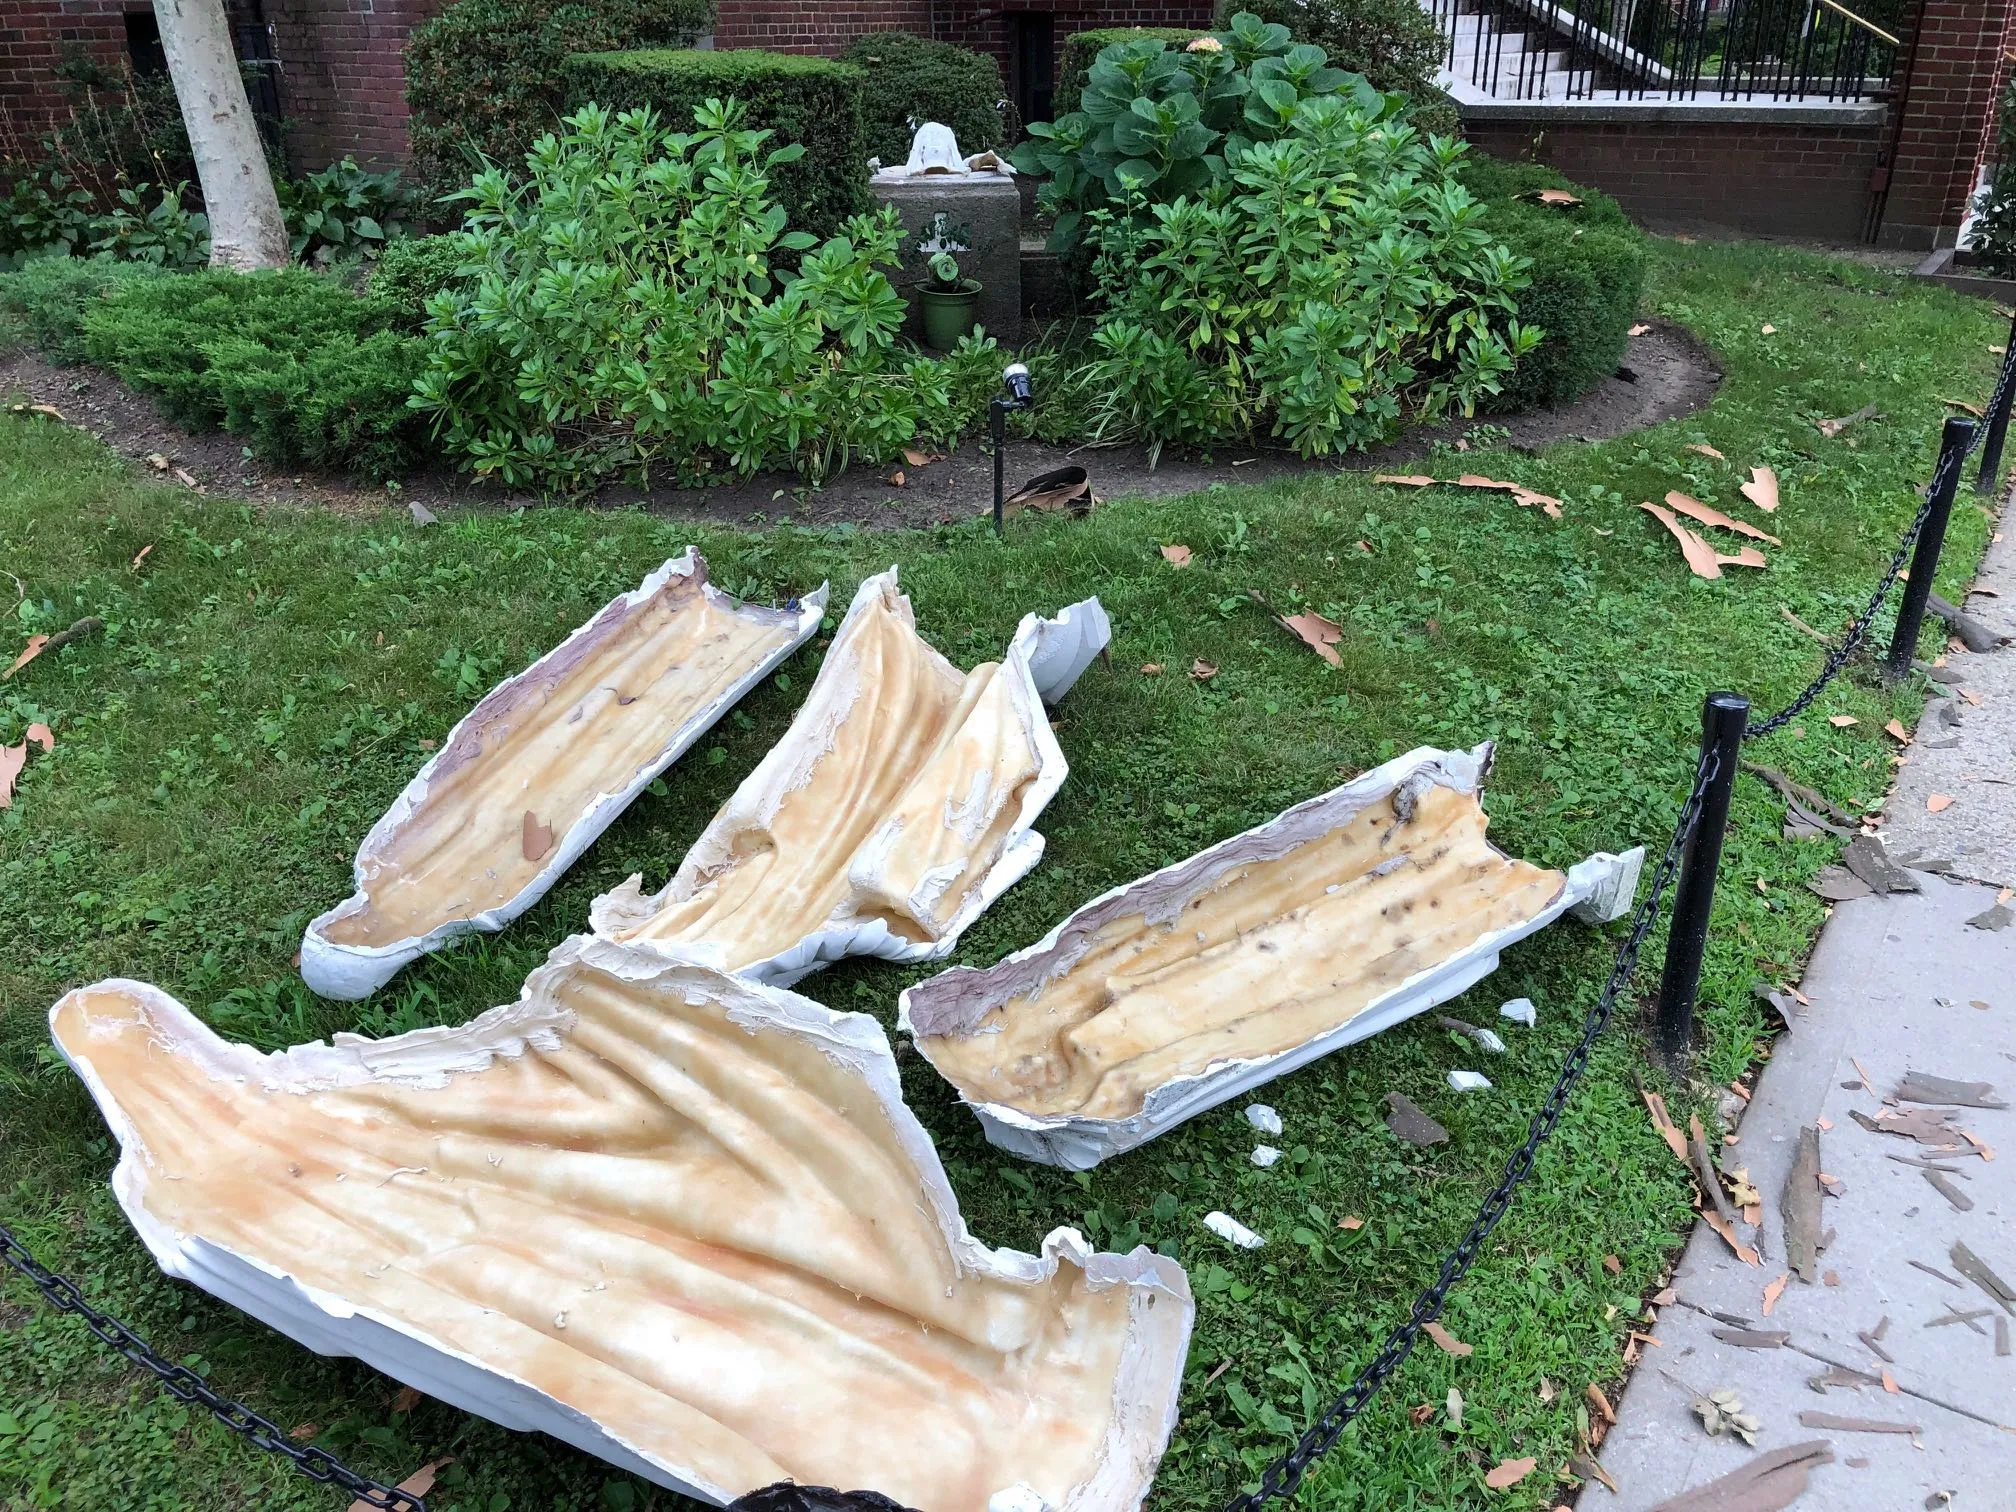 Remains of the statues vandalized at Our Lady of Mercy parish in New York City, July17, 2021. Credit: Diocese of Brooklyn.?w=200&h=150